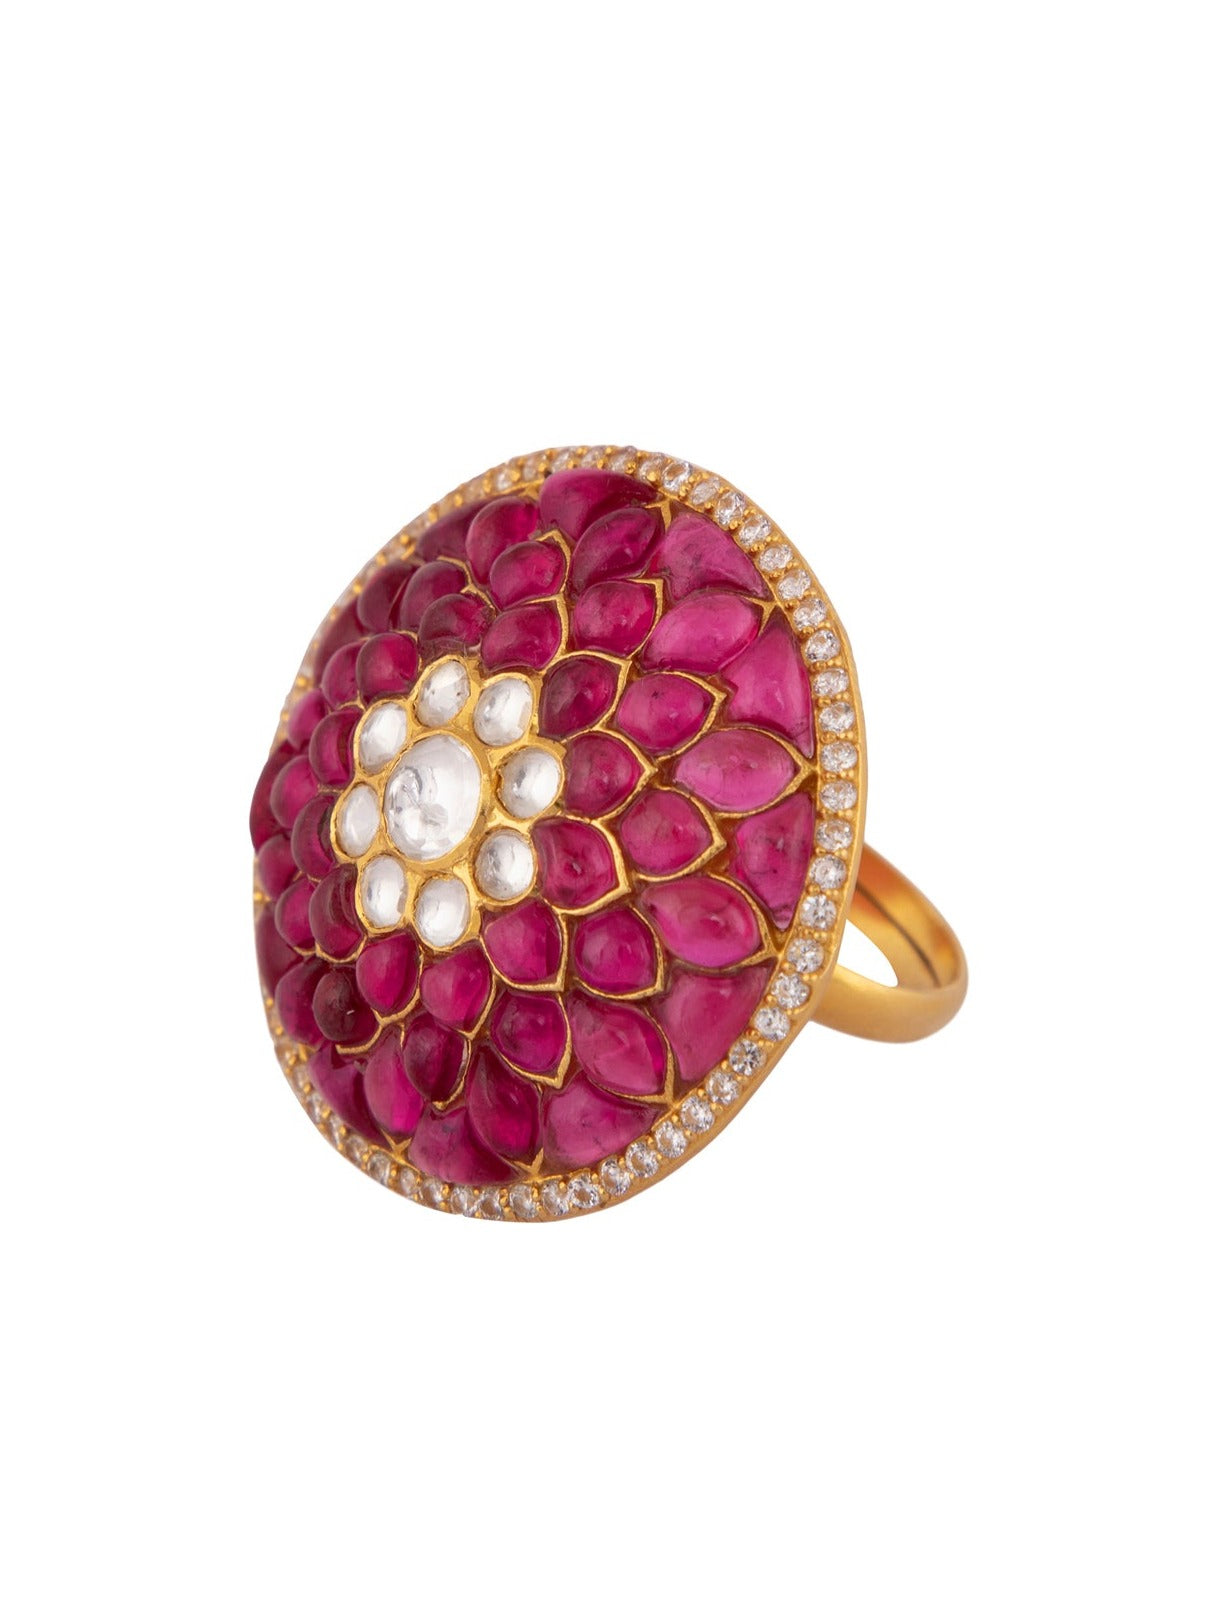 Attractive Emerald And Ruby Studded Gold Ring